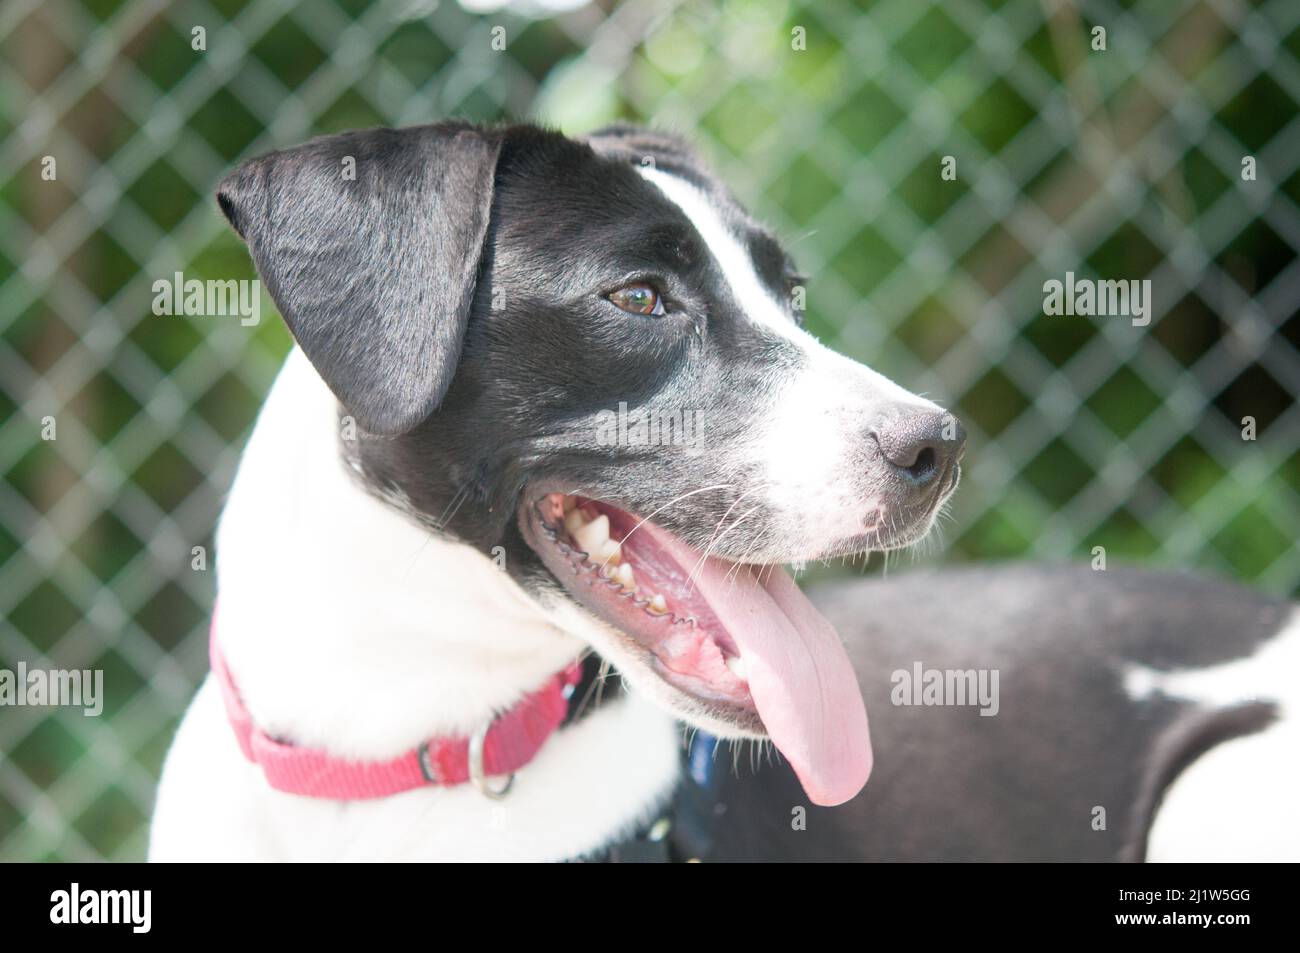 Black and white shelter dog with tongue out Stock Photo